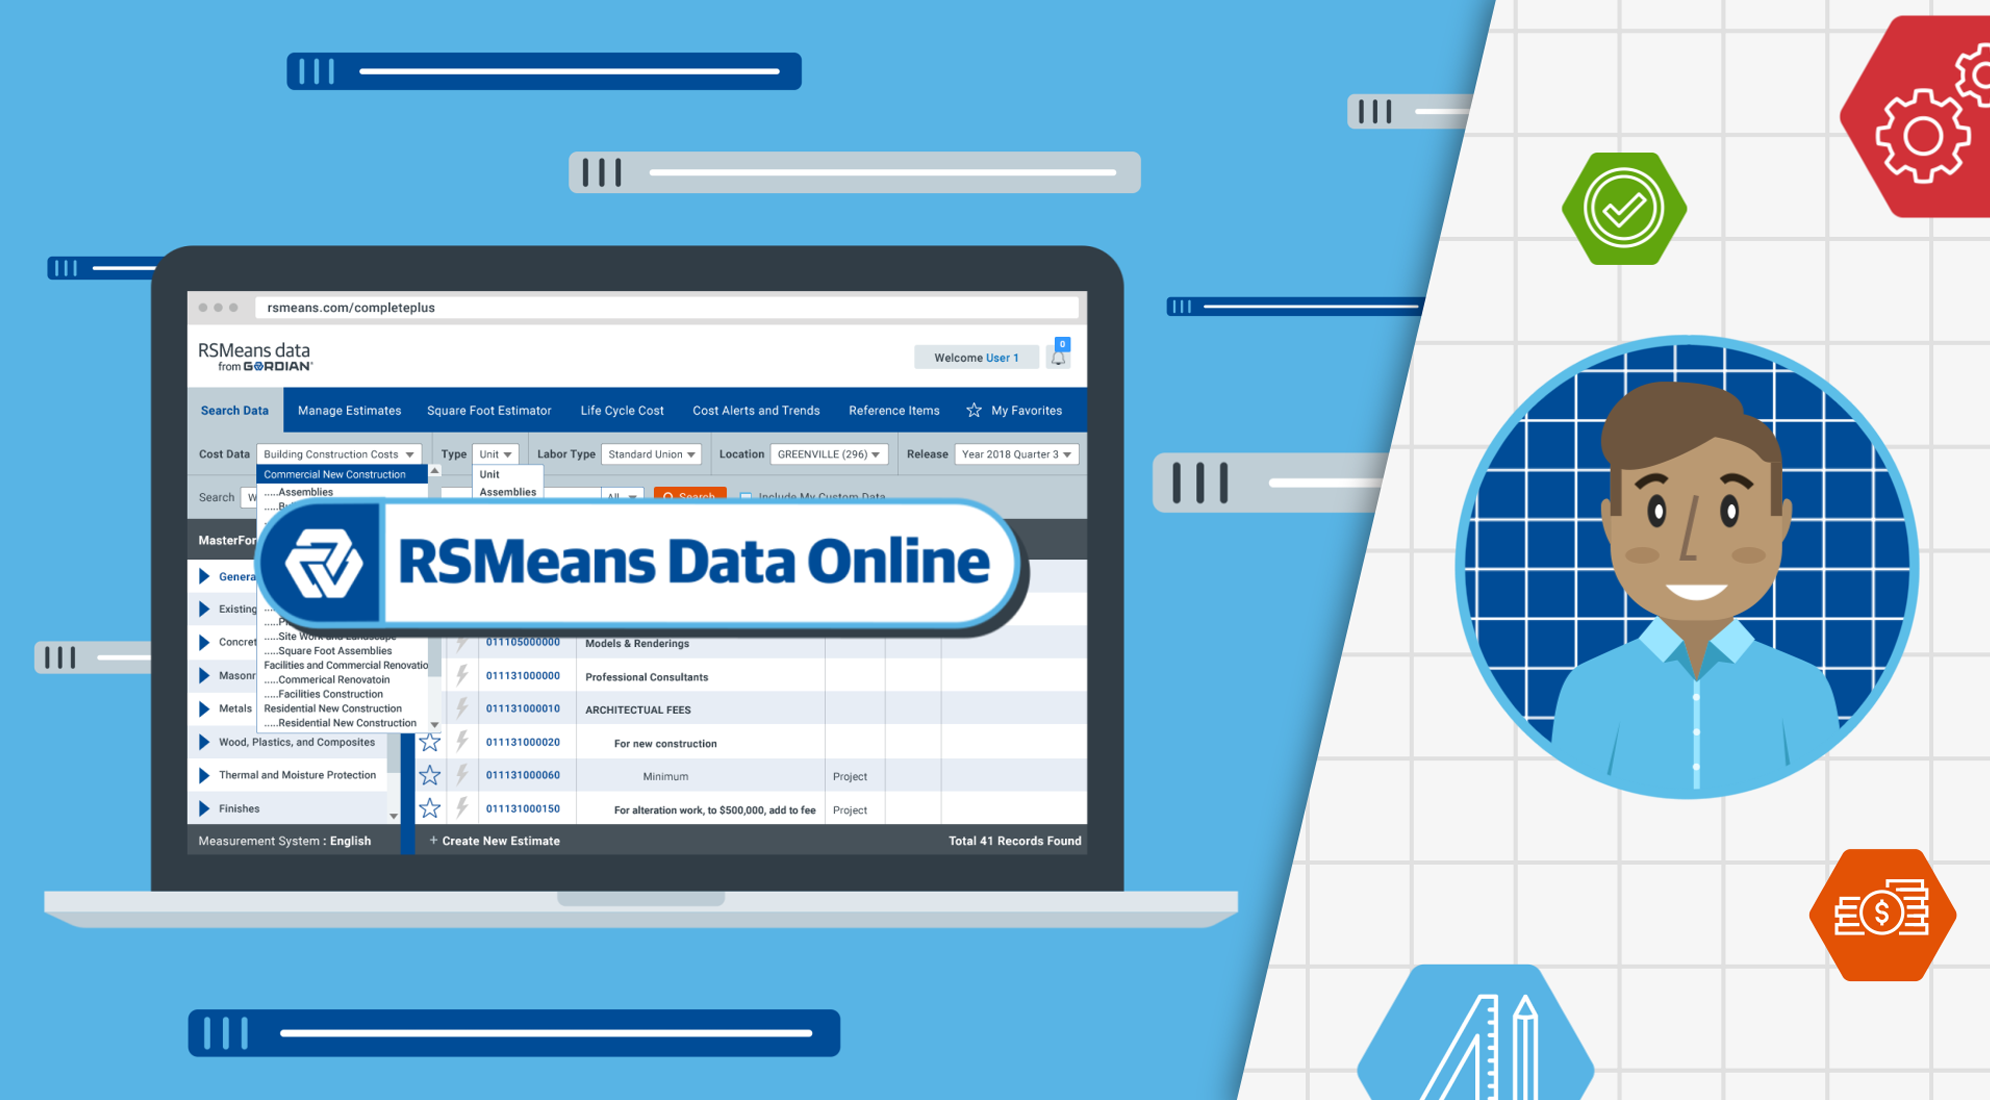 Why Choose RSMeans Data Online?